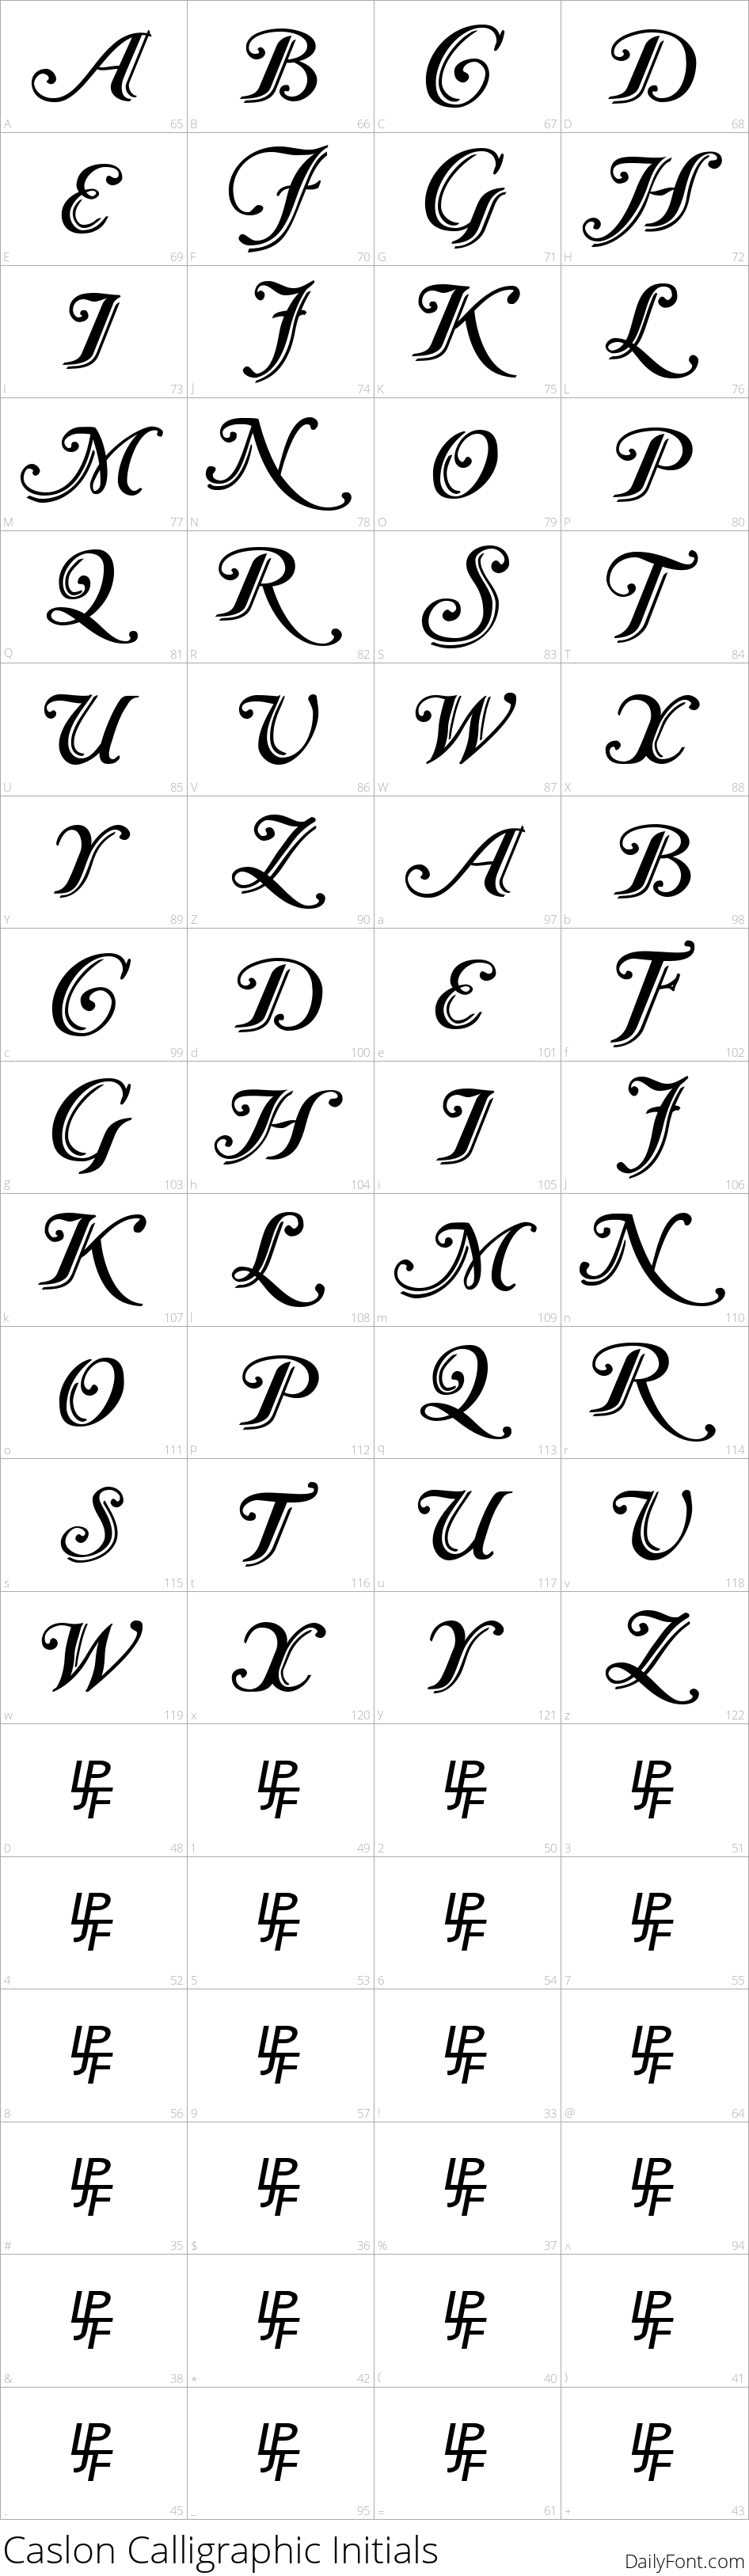 Caslon Calligraphic Initials character map